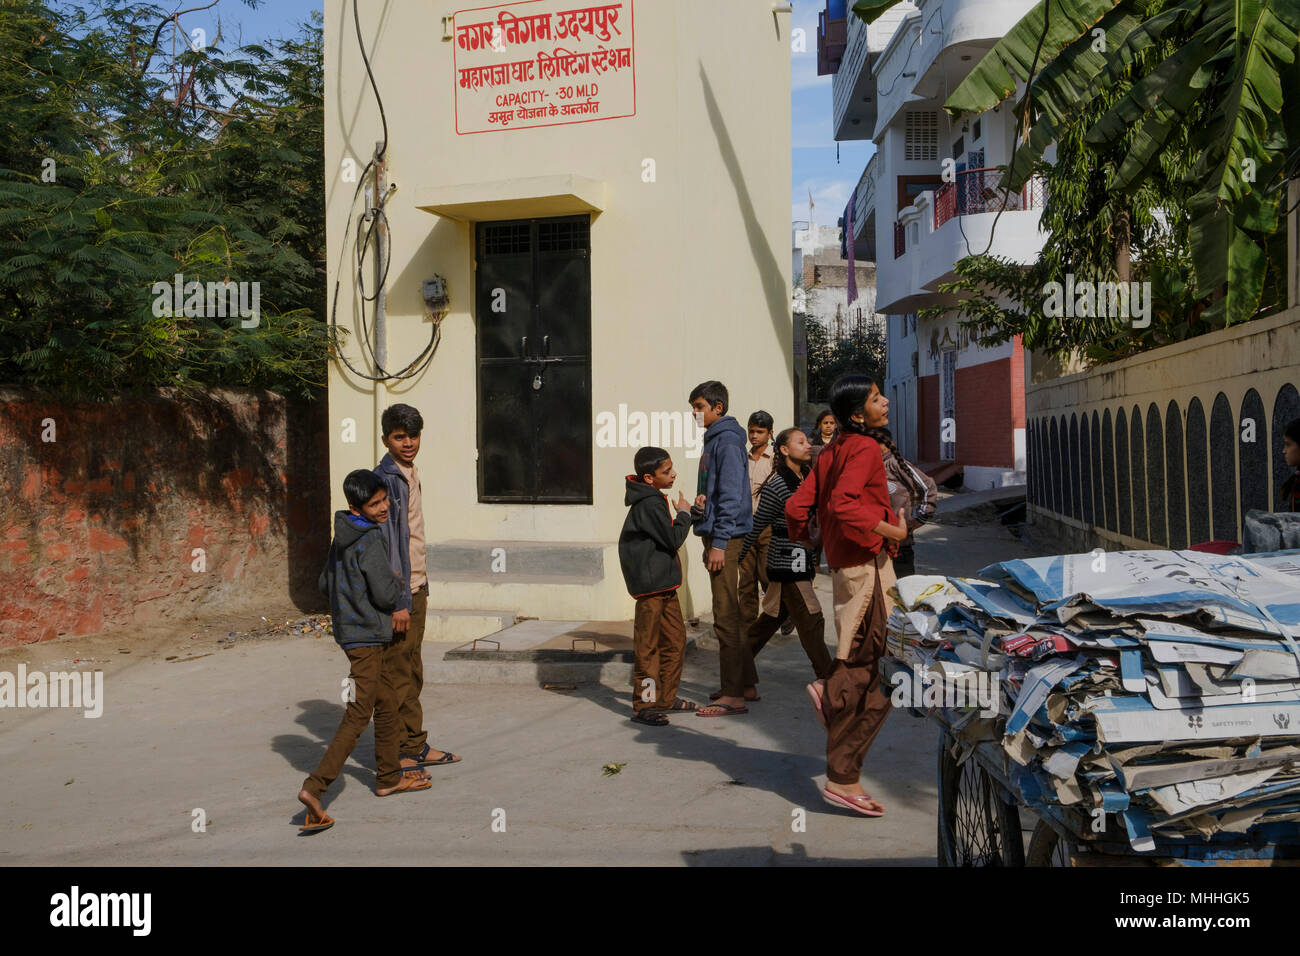 School children on a street corner by a cart with cardboard for recycling. Udaipur, also known as the City of Lakes, The Venice of the East, is the historic capital of the kingdom of Mewar, Rajasthan. Stock Photo